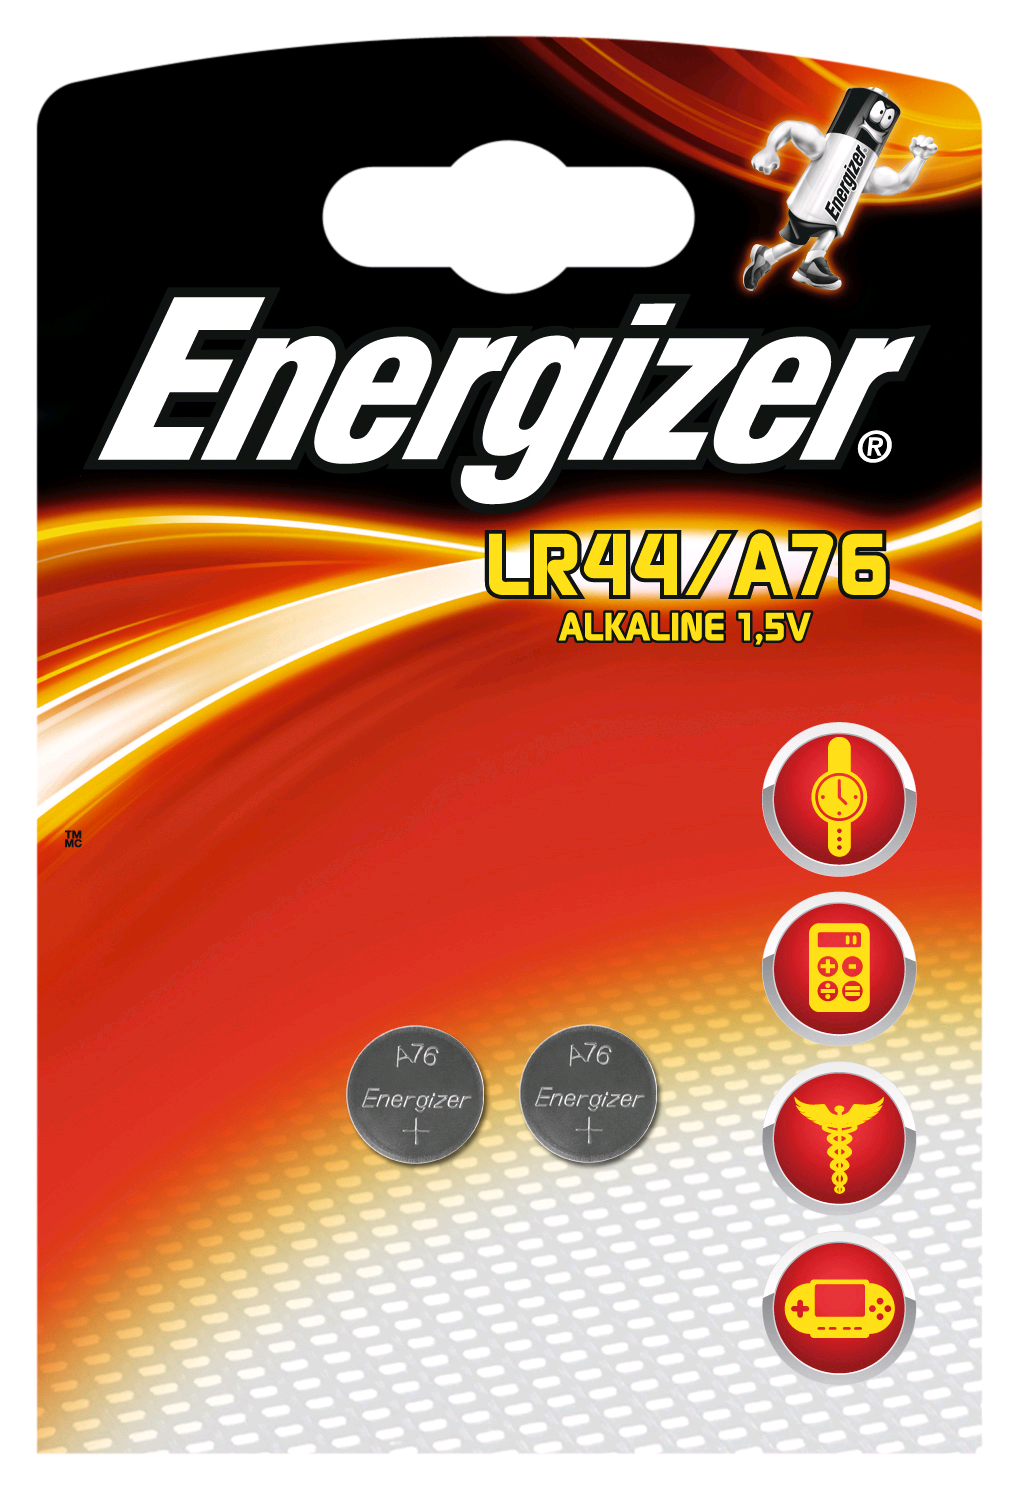 Energizer LR44 1.5V Button Cell Battery Twin Pack (AG13) S3285